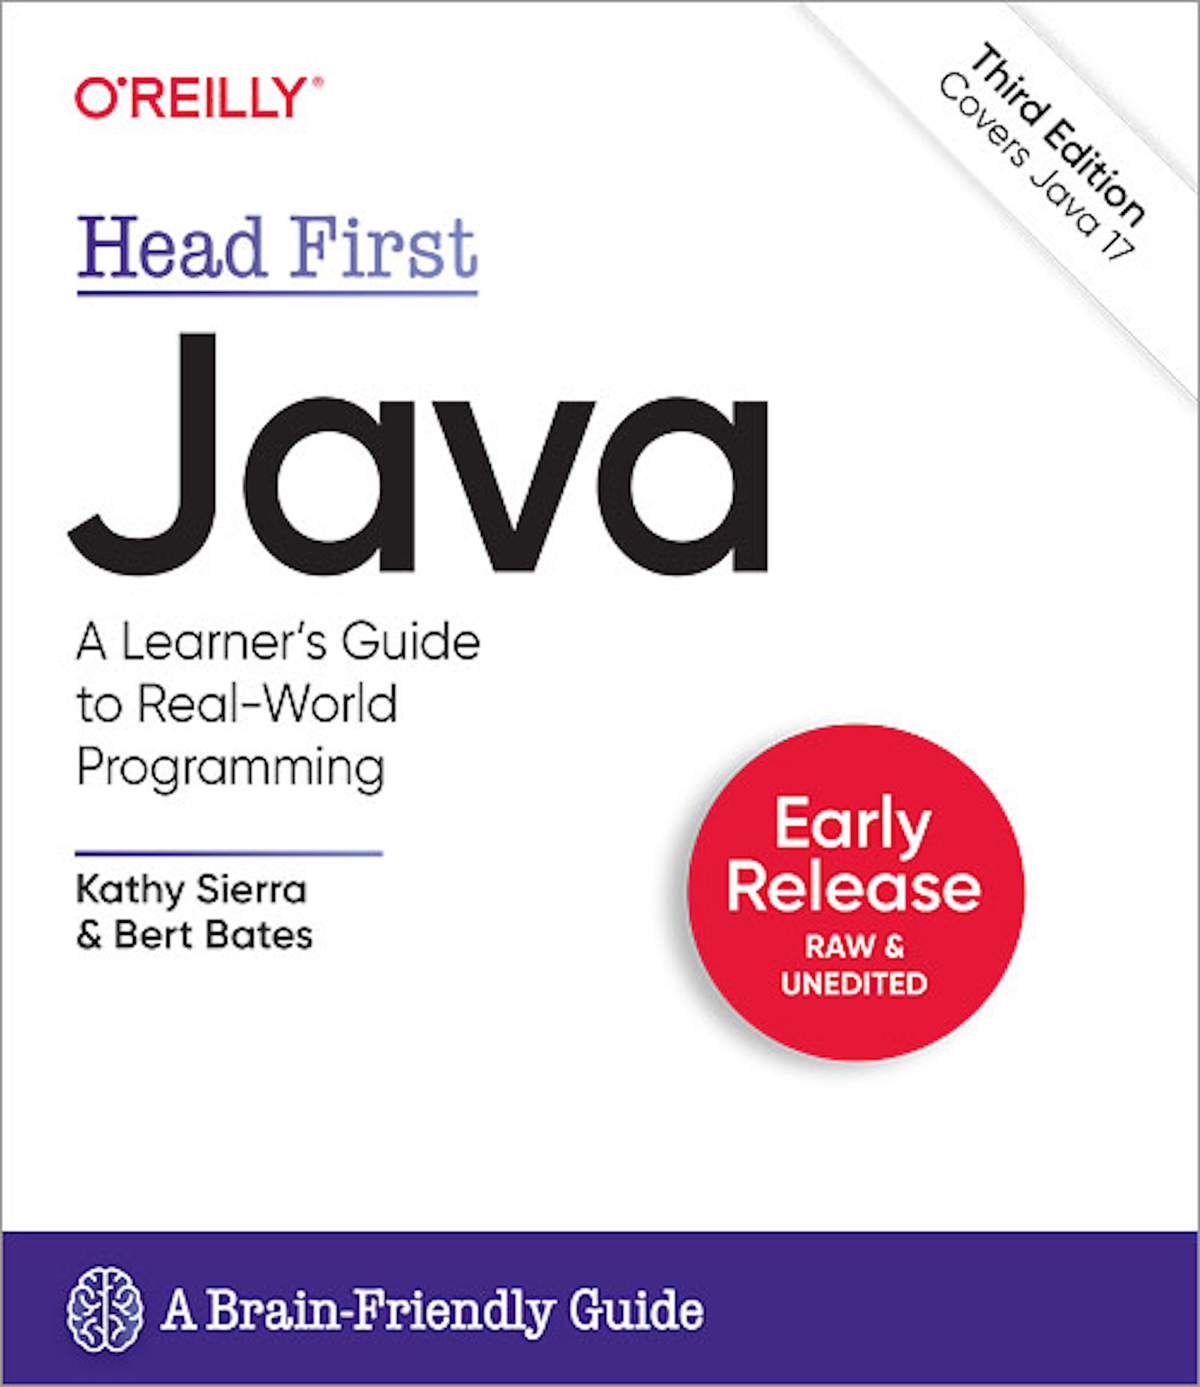 Head First Java by Kathy Sierra and Bert Bates Copyright 2021 Kathy Sierra and - photo 1